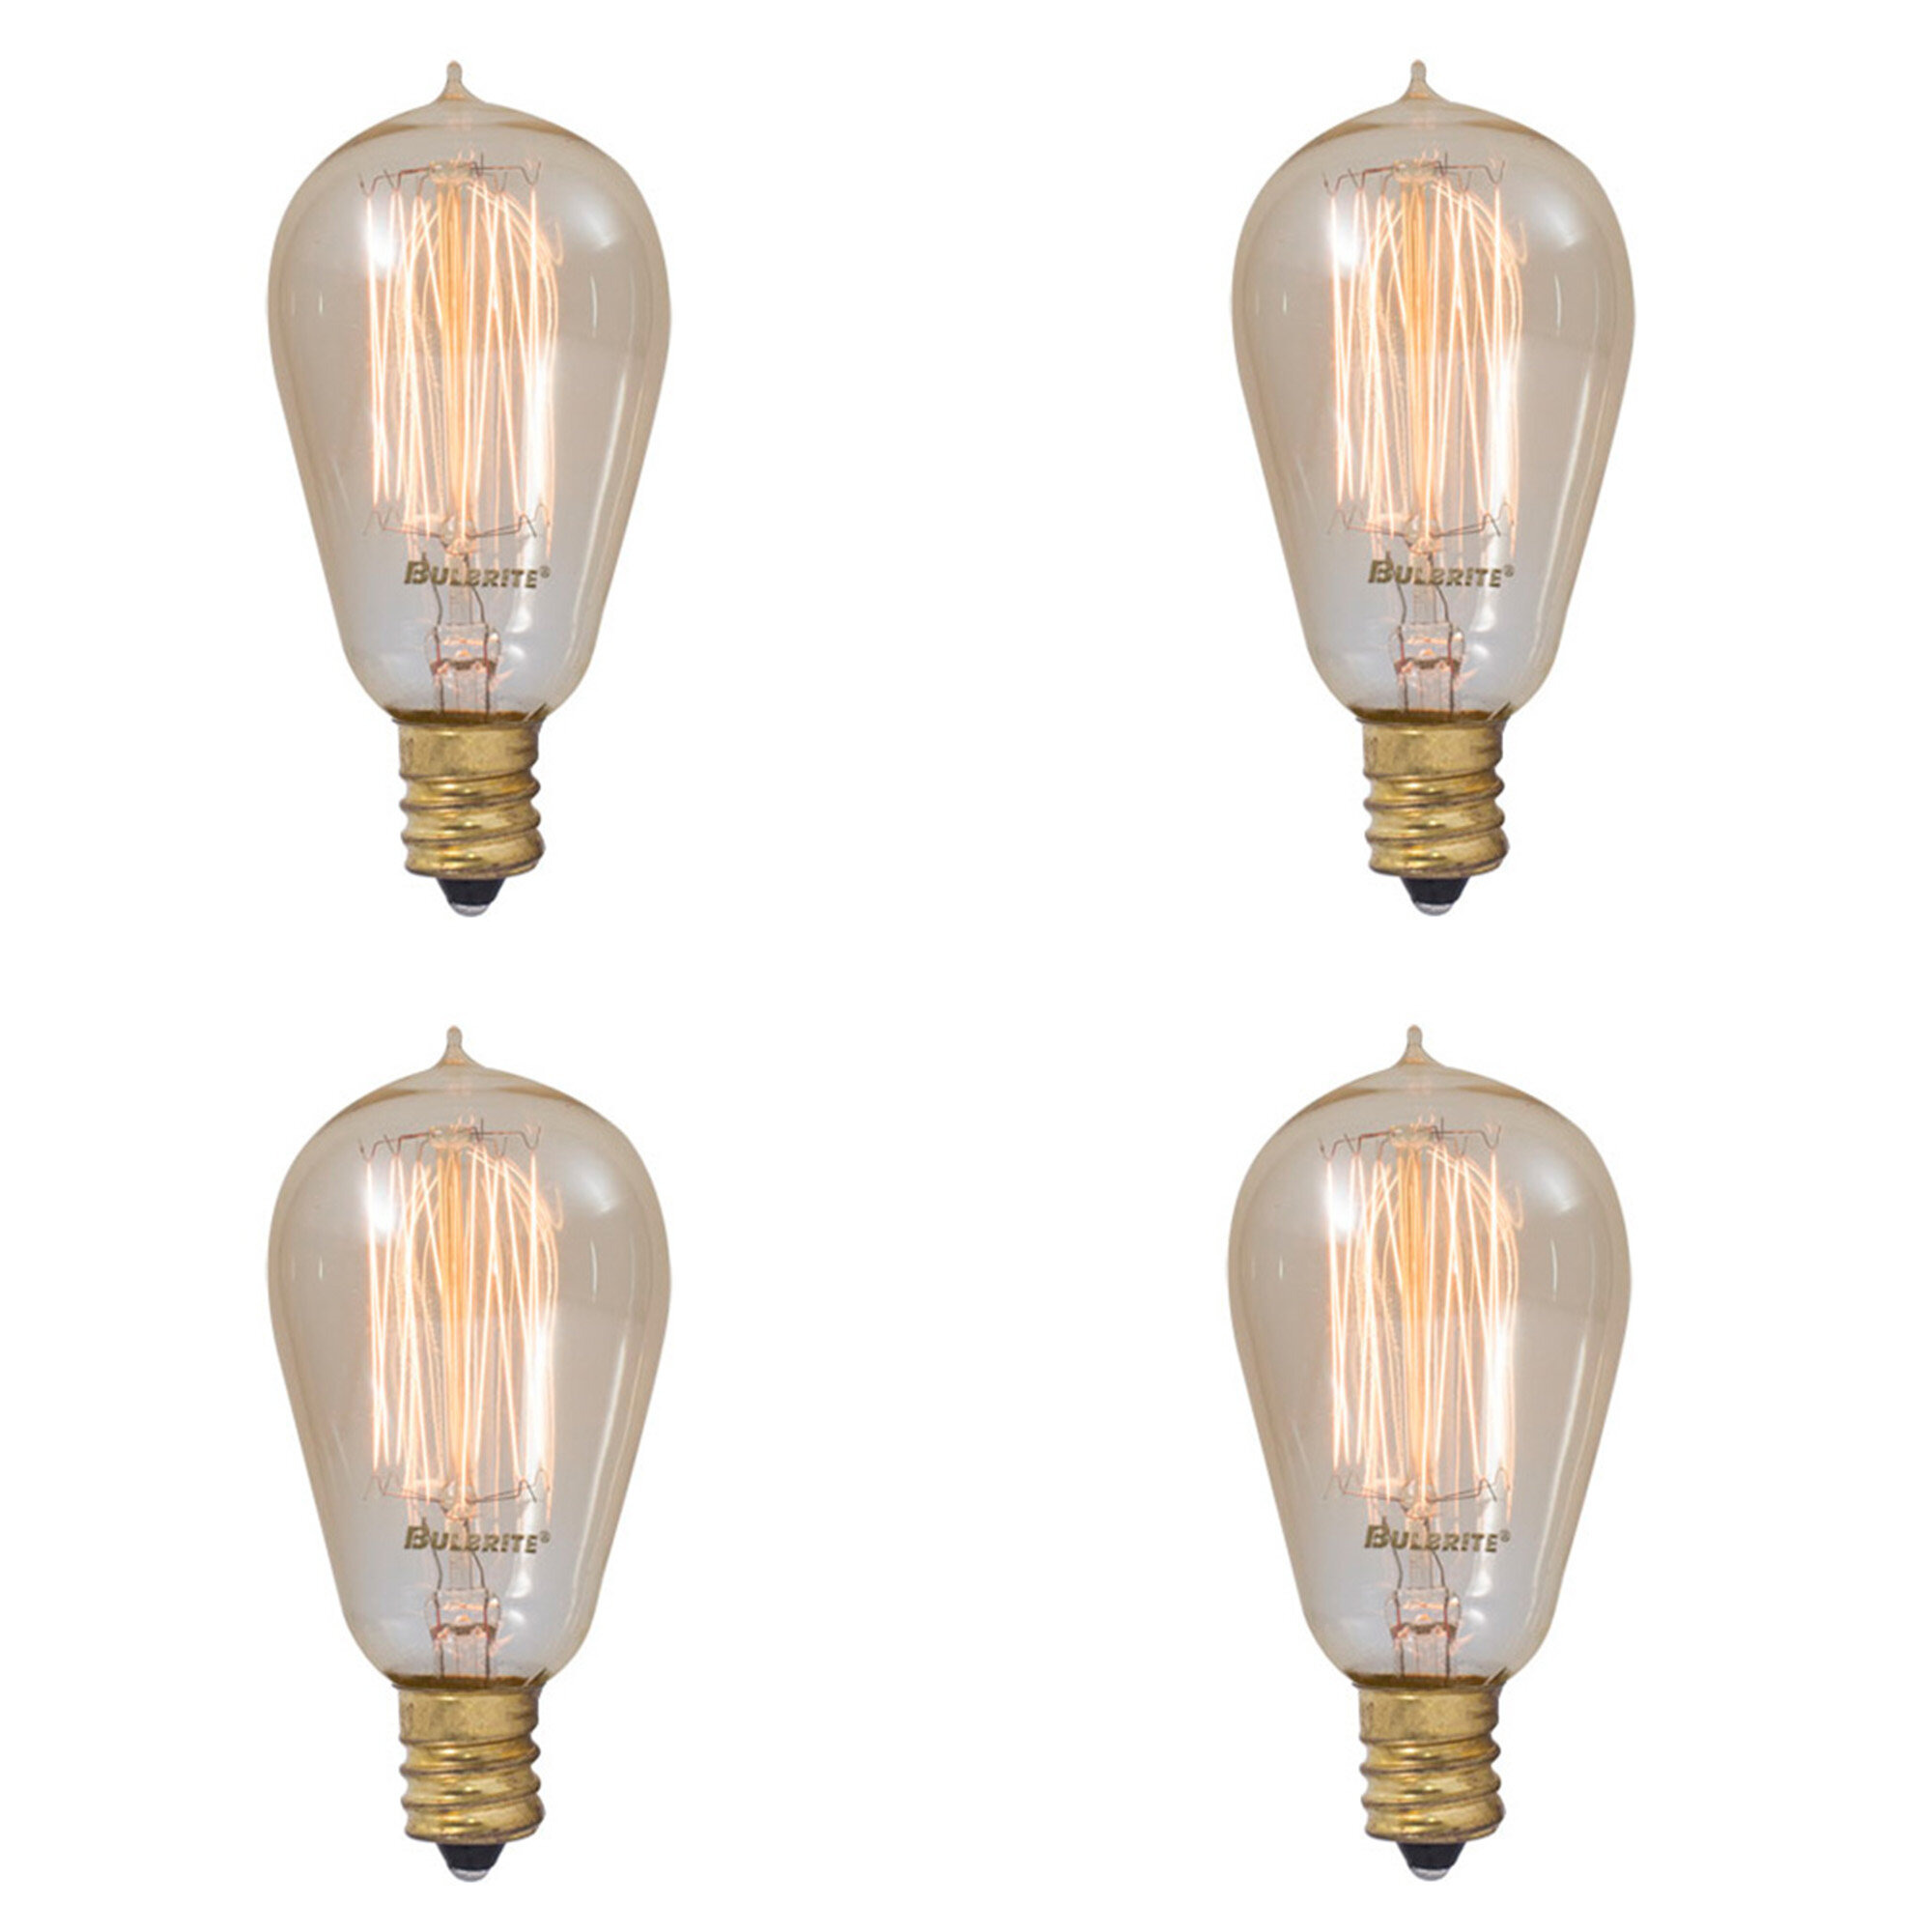 2 Pack 25W 125 Lumens Dimmable Vintage Incandescent Chandelier Bulb Edison Style Crown Filament CA Type E12 Candelabra Base